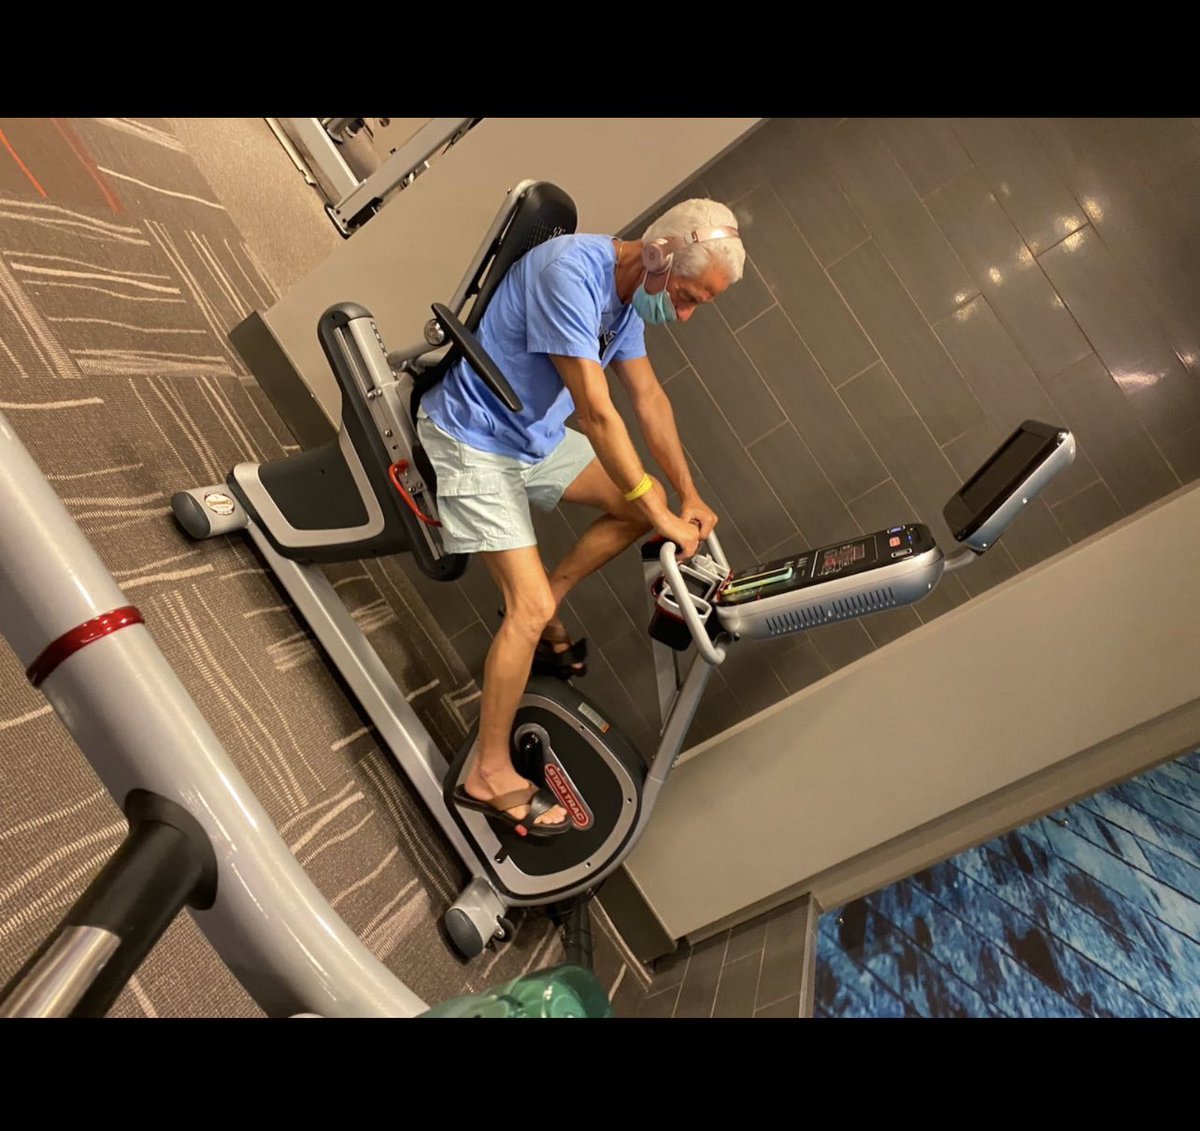 This is Charlie Crist. He wears a mask at the gym.